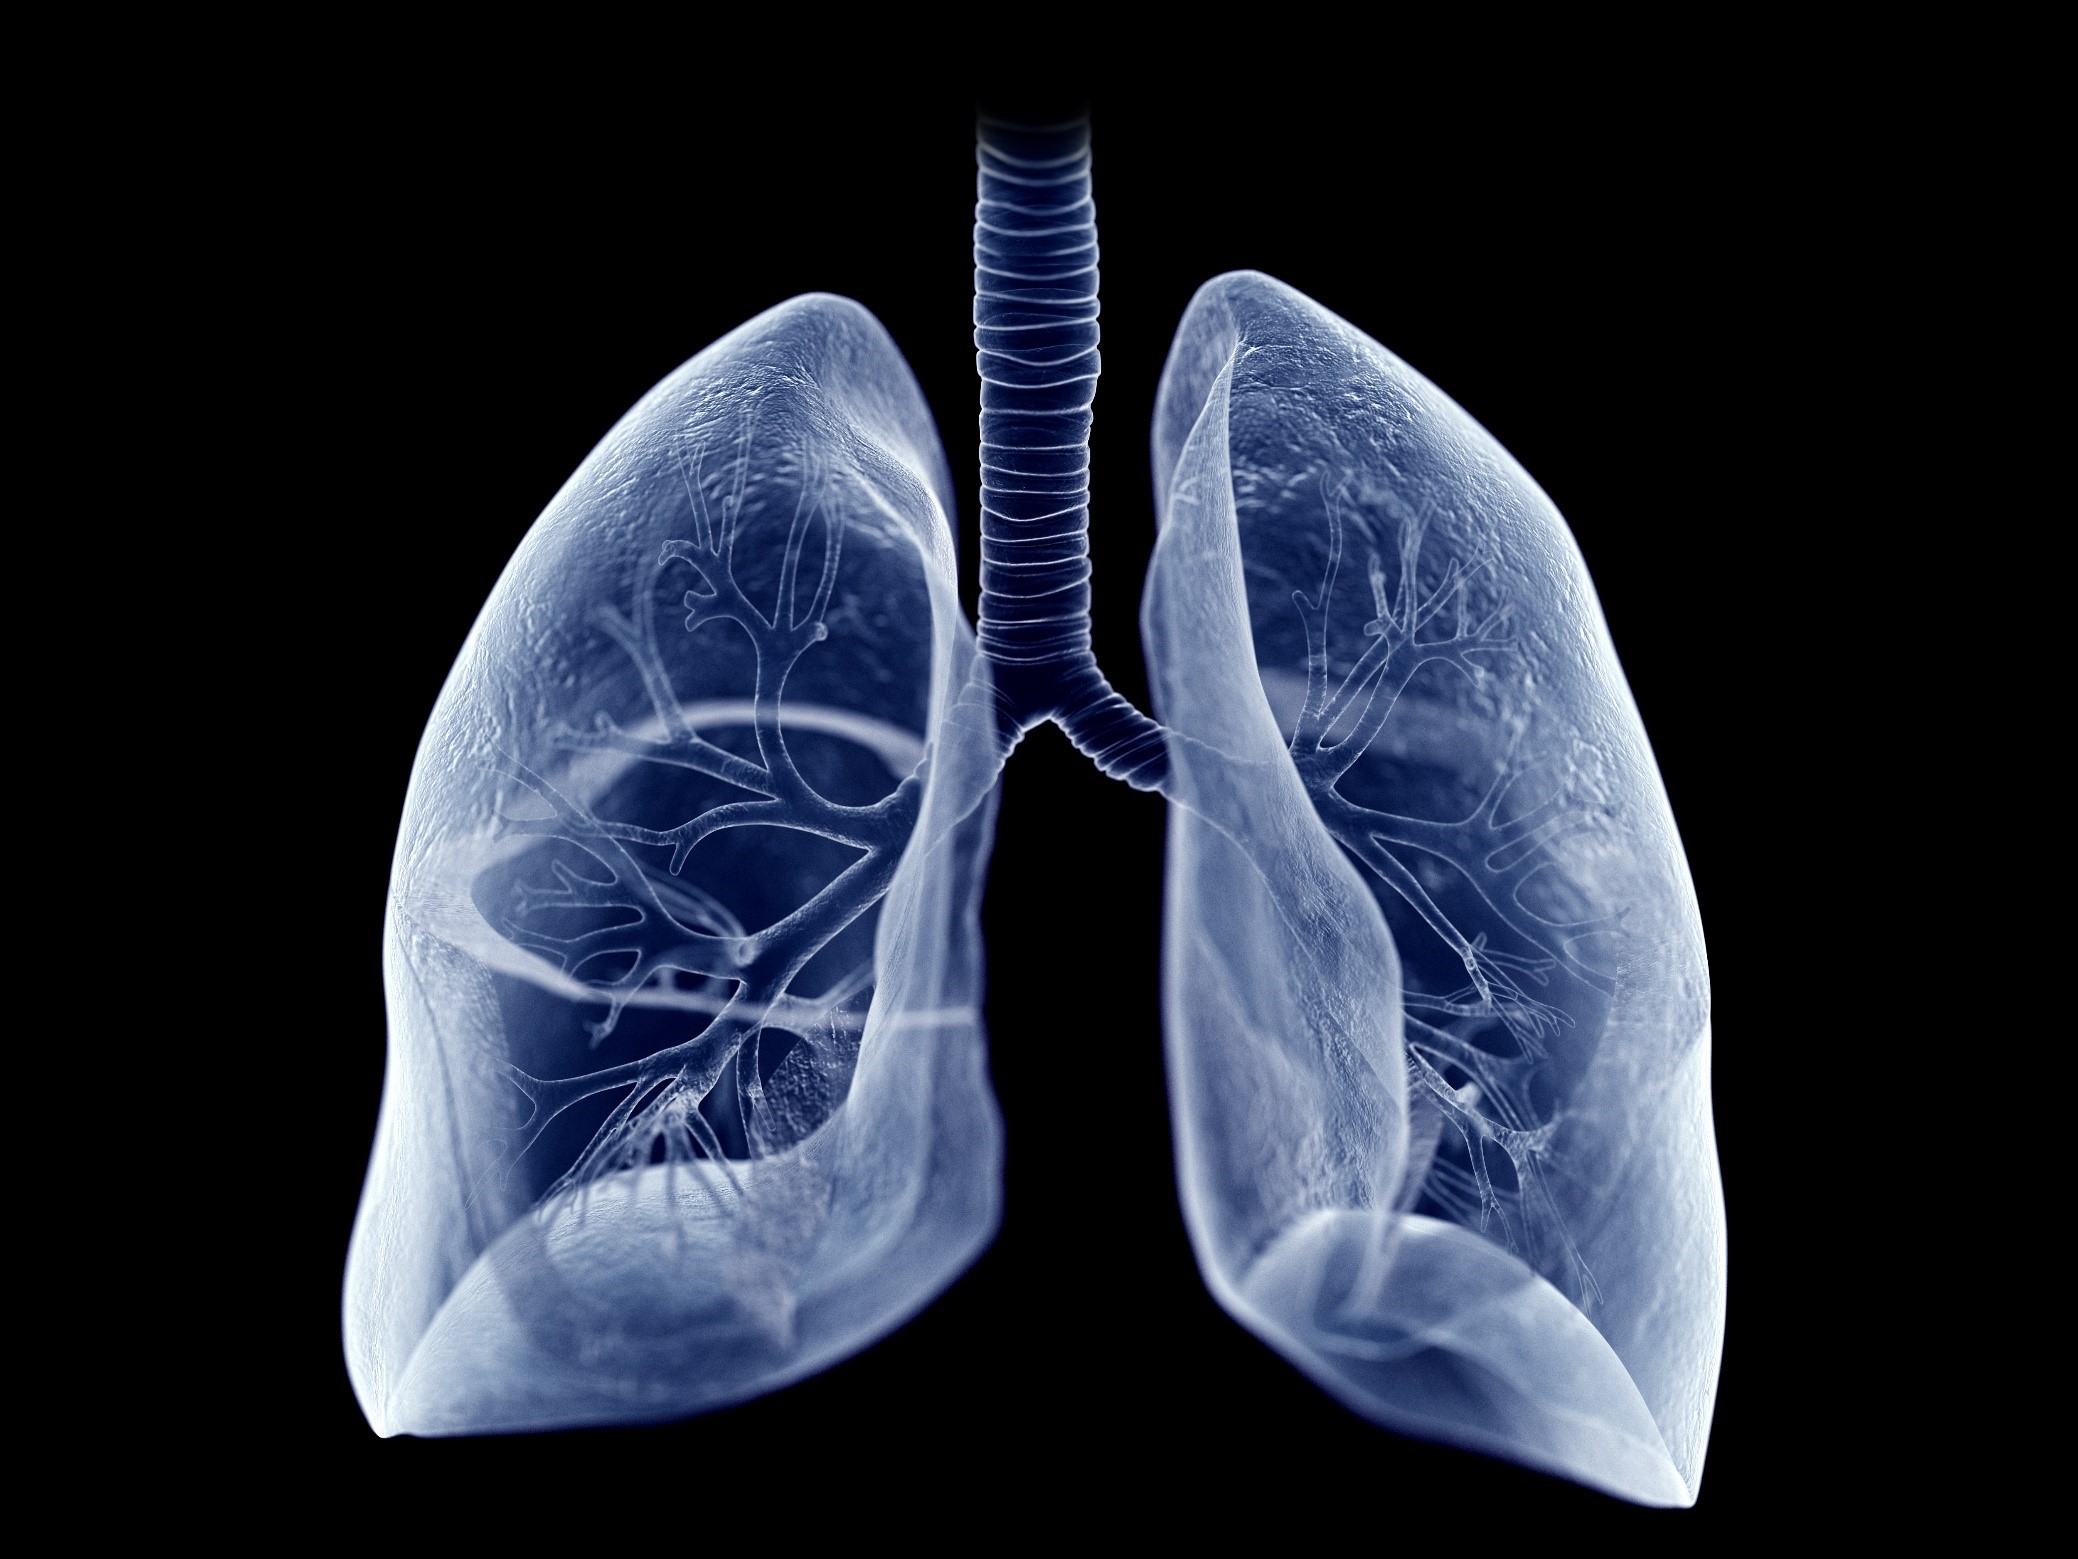  Highly efficient memory B cells found in the lungs |  press room

